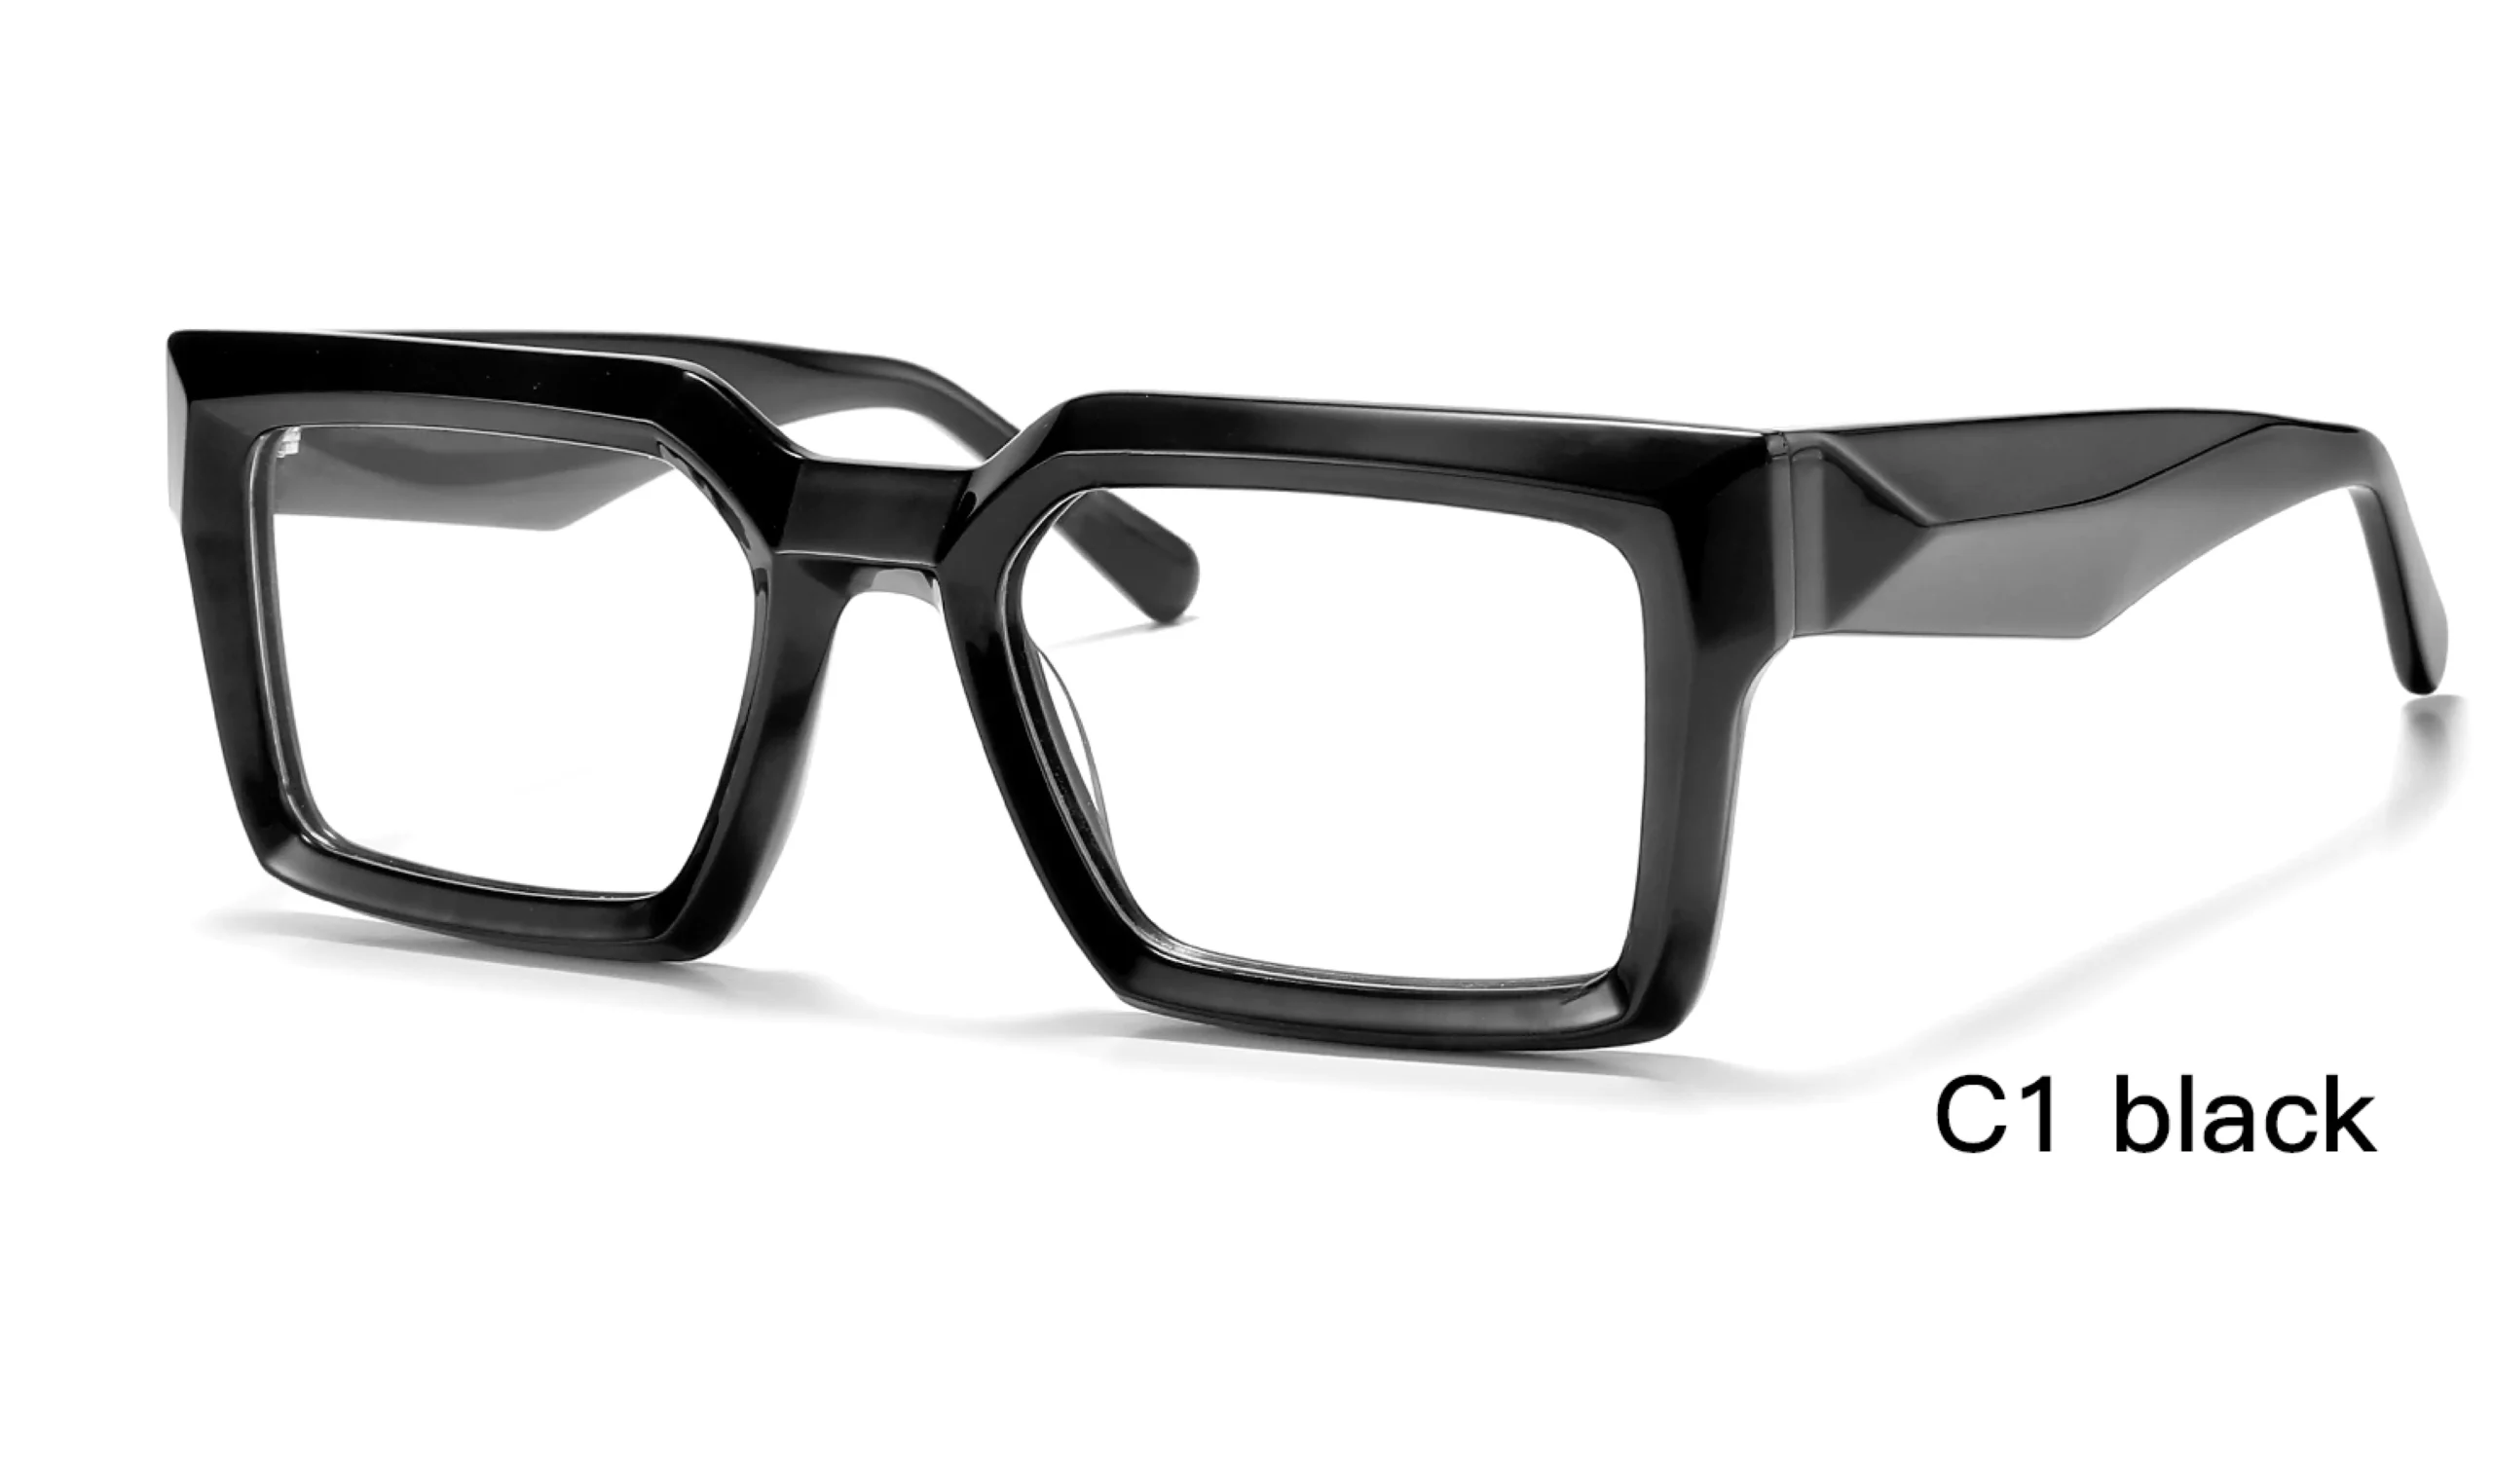 wholesale replica designer glasses, thick frame, black, stereoscopic glasses, made in China, acetate, 45 degree display